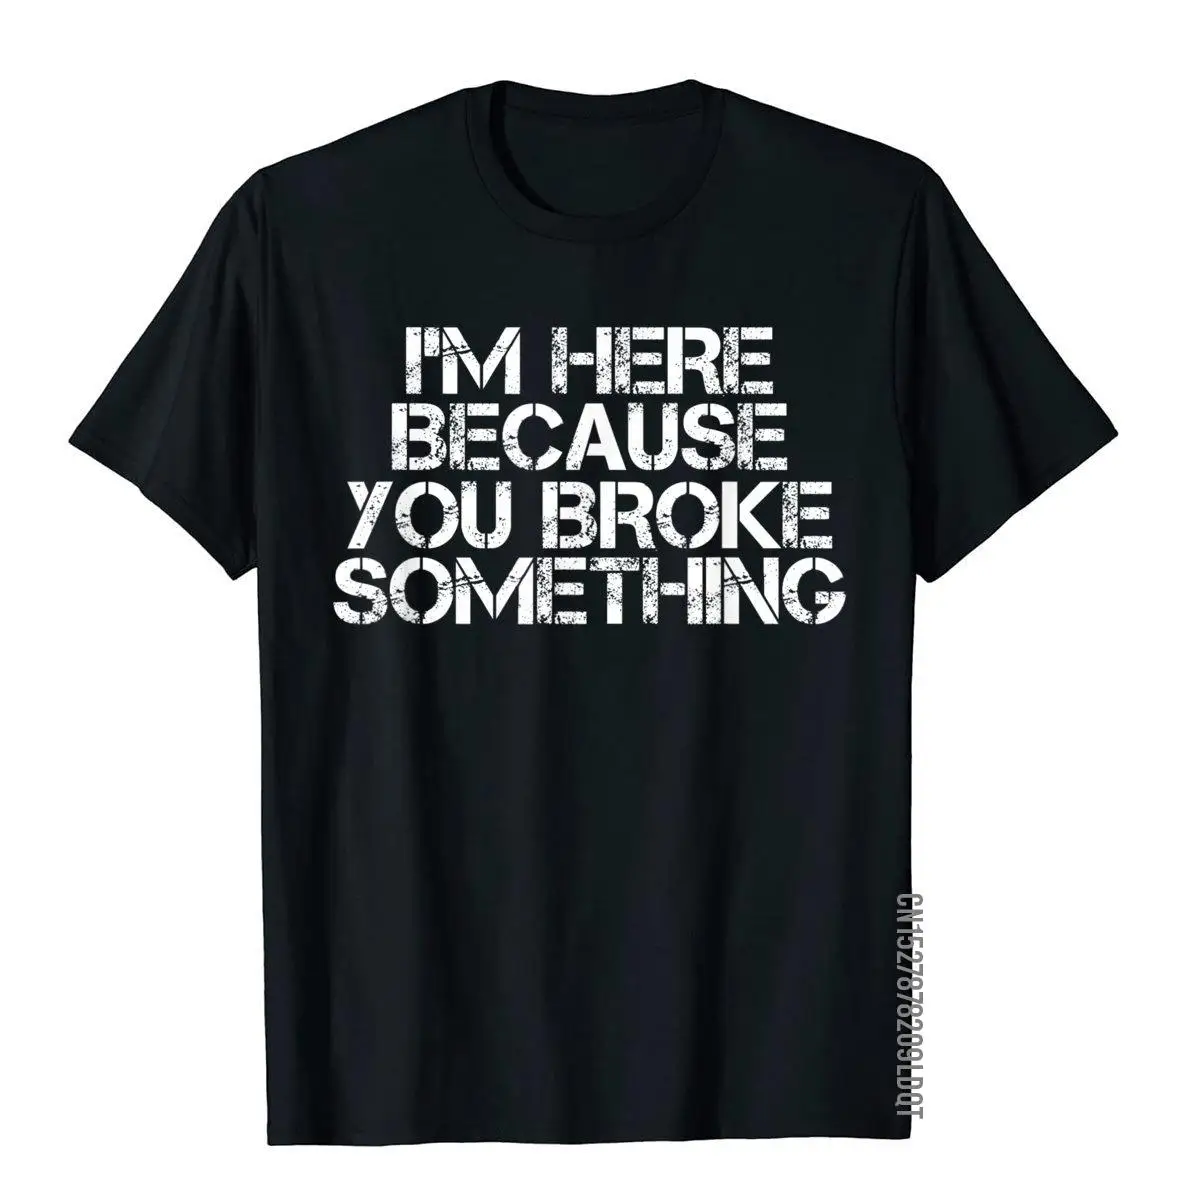 

I'm HERE BECAUSE YOU BROKE SOMETHING Shirt Funny Gift Idea Tops T Shirt Plain Cosie Cotton Man T Shirt Personalized